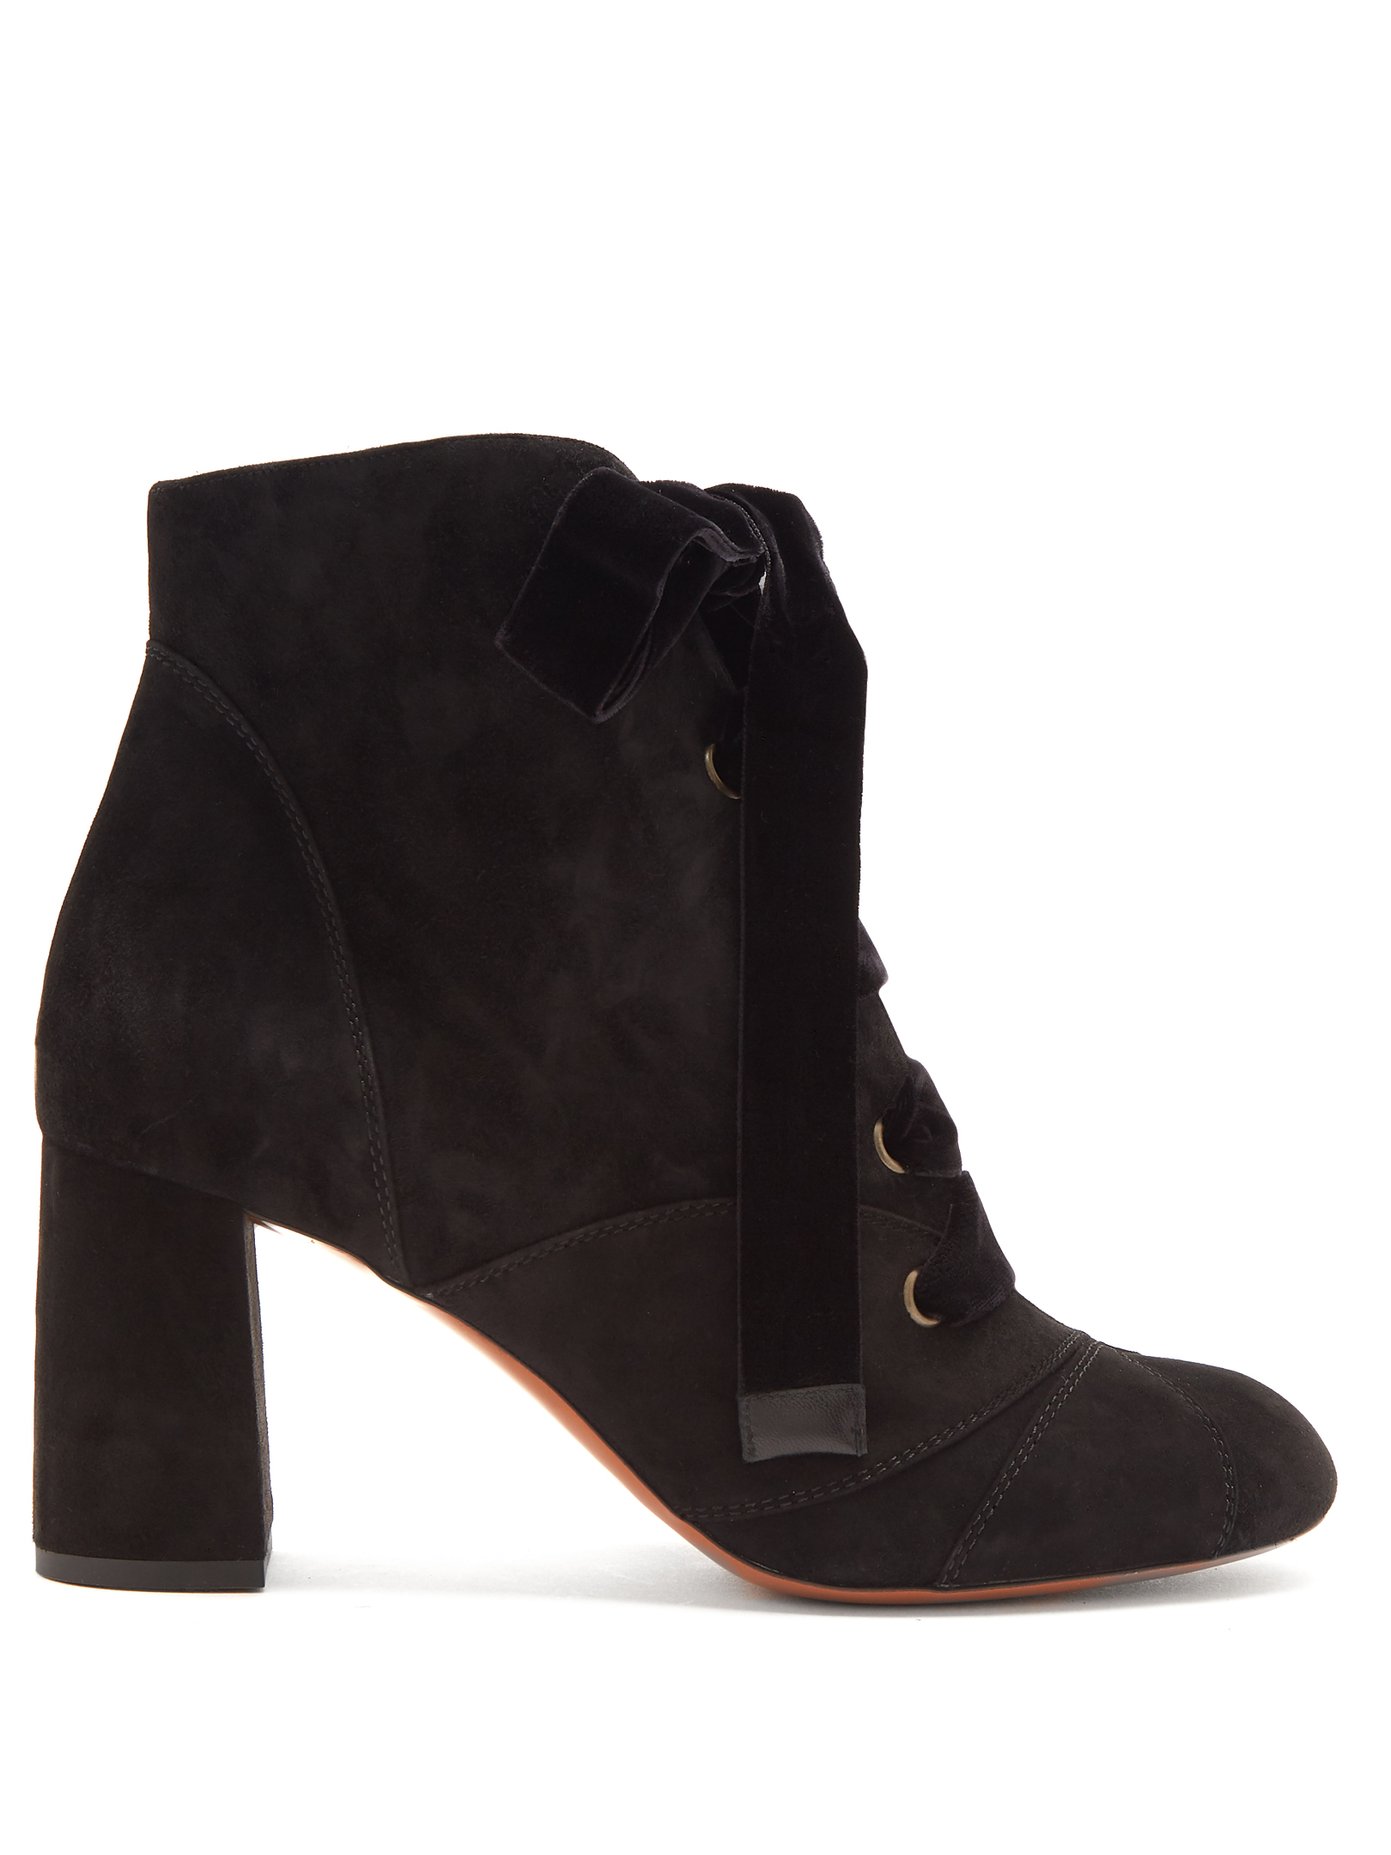 chloe suede boots